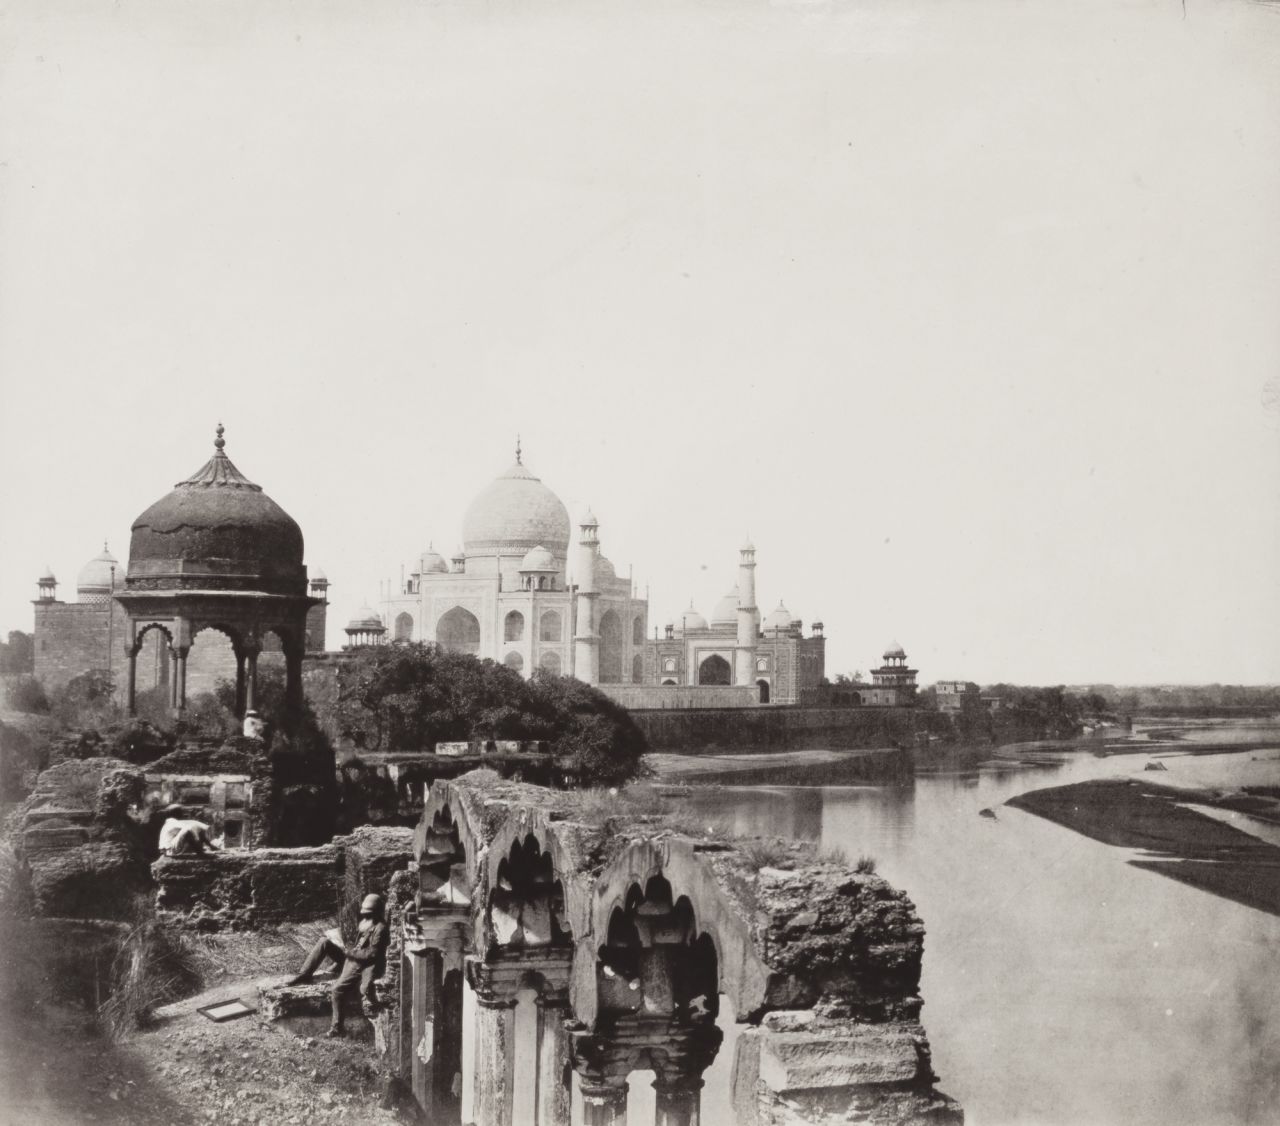 A photograph from around 1860 shows ruins near the Taj Mahal. India was often depicted as a crumbling former empire in "need of intervention," according to the author of a new book.